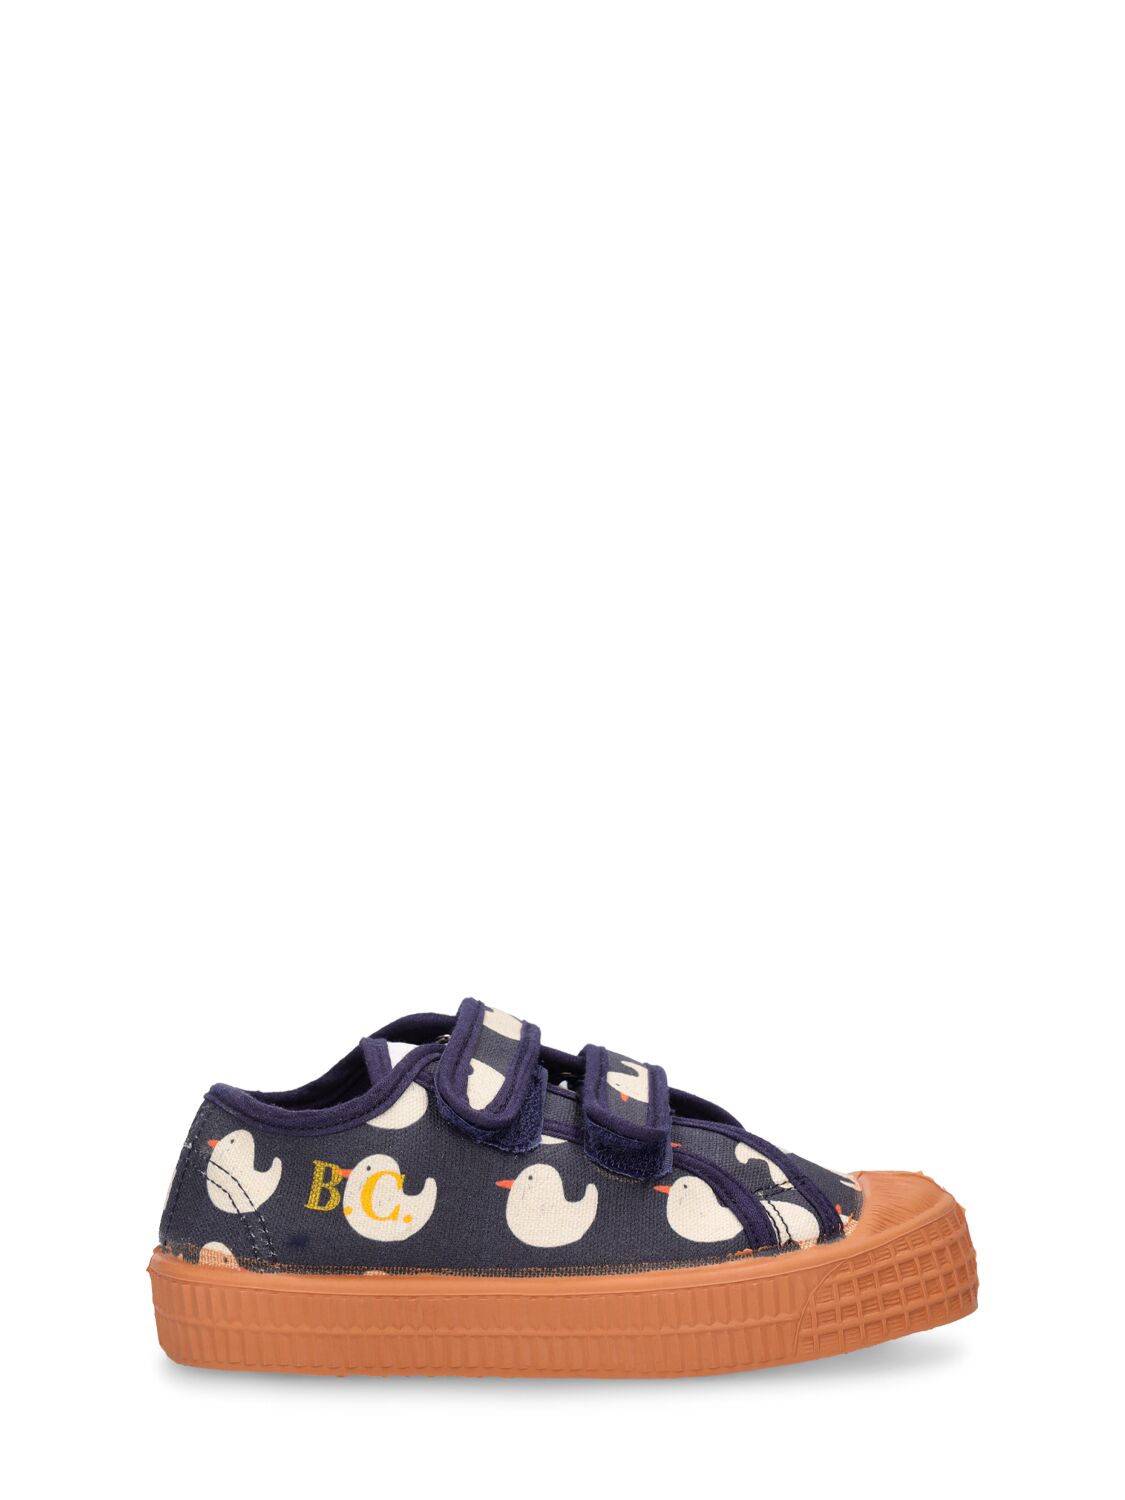 Image of Printed Cotton Strap Sneakers